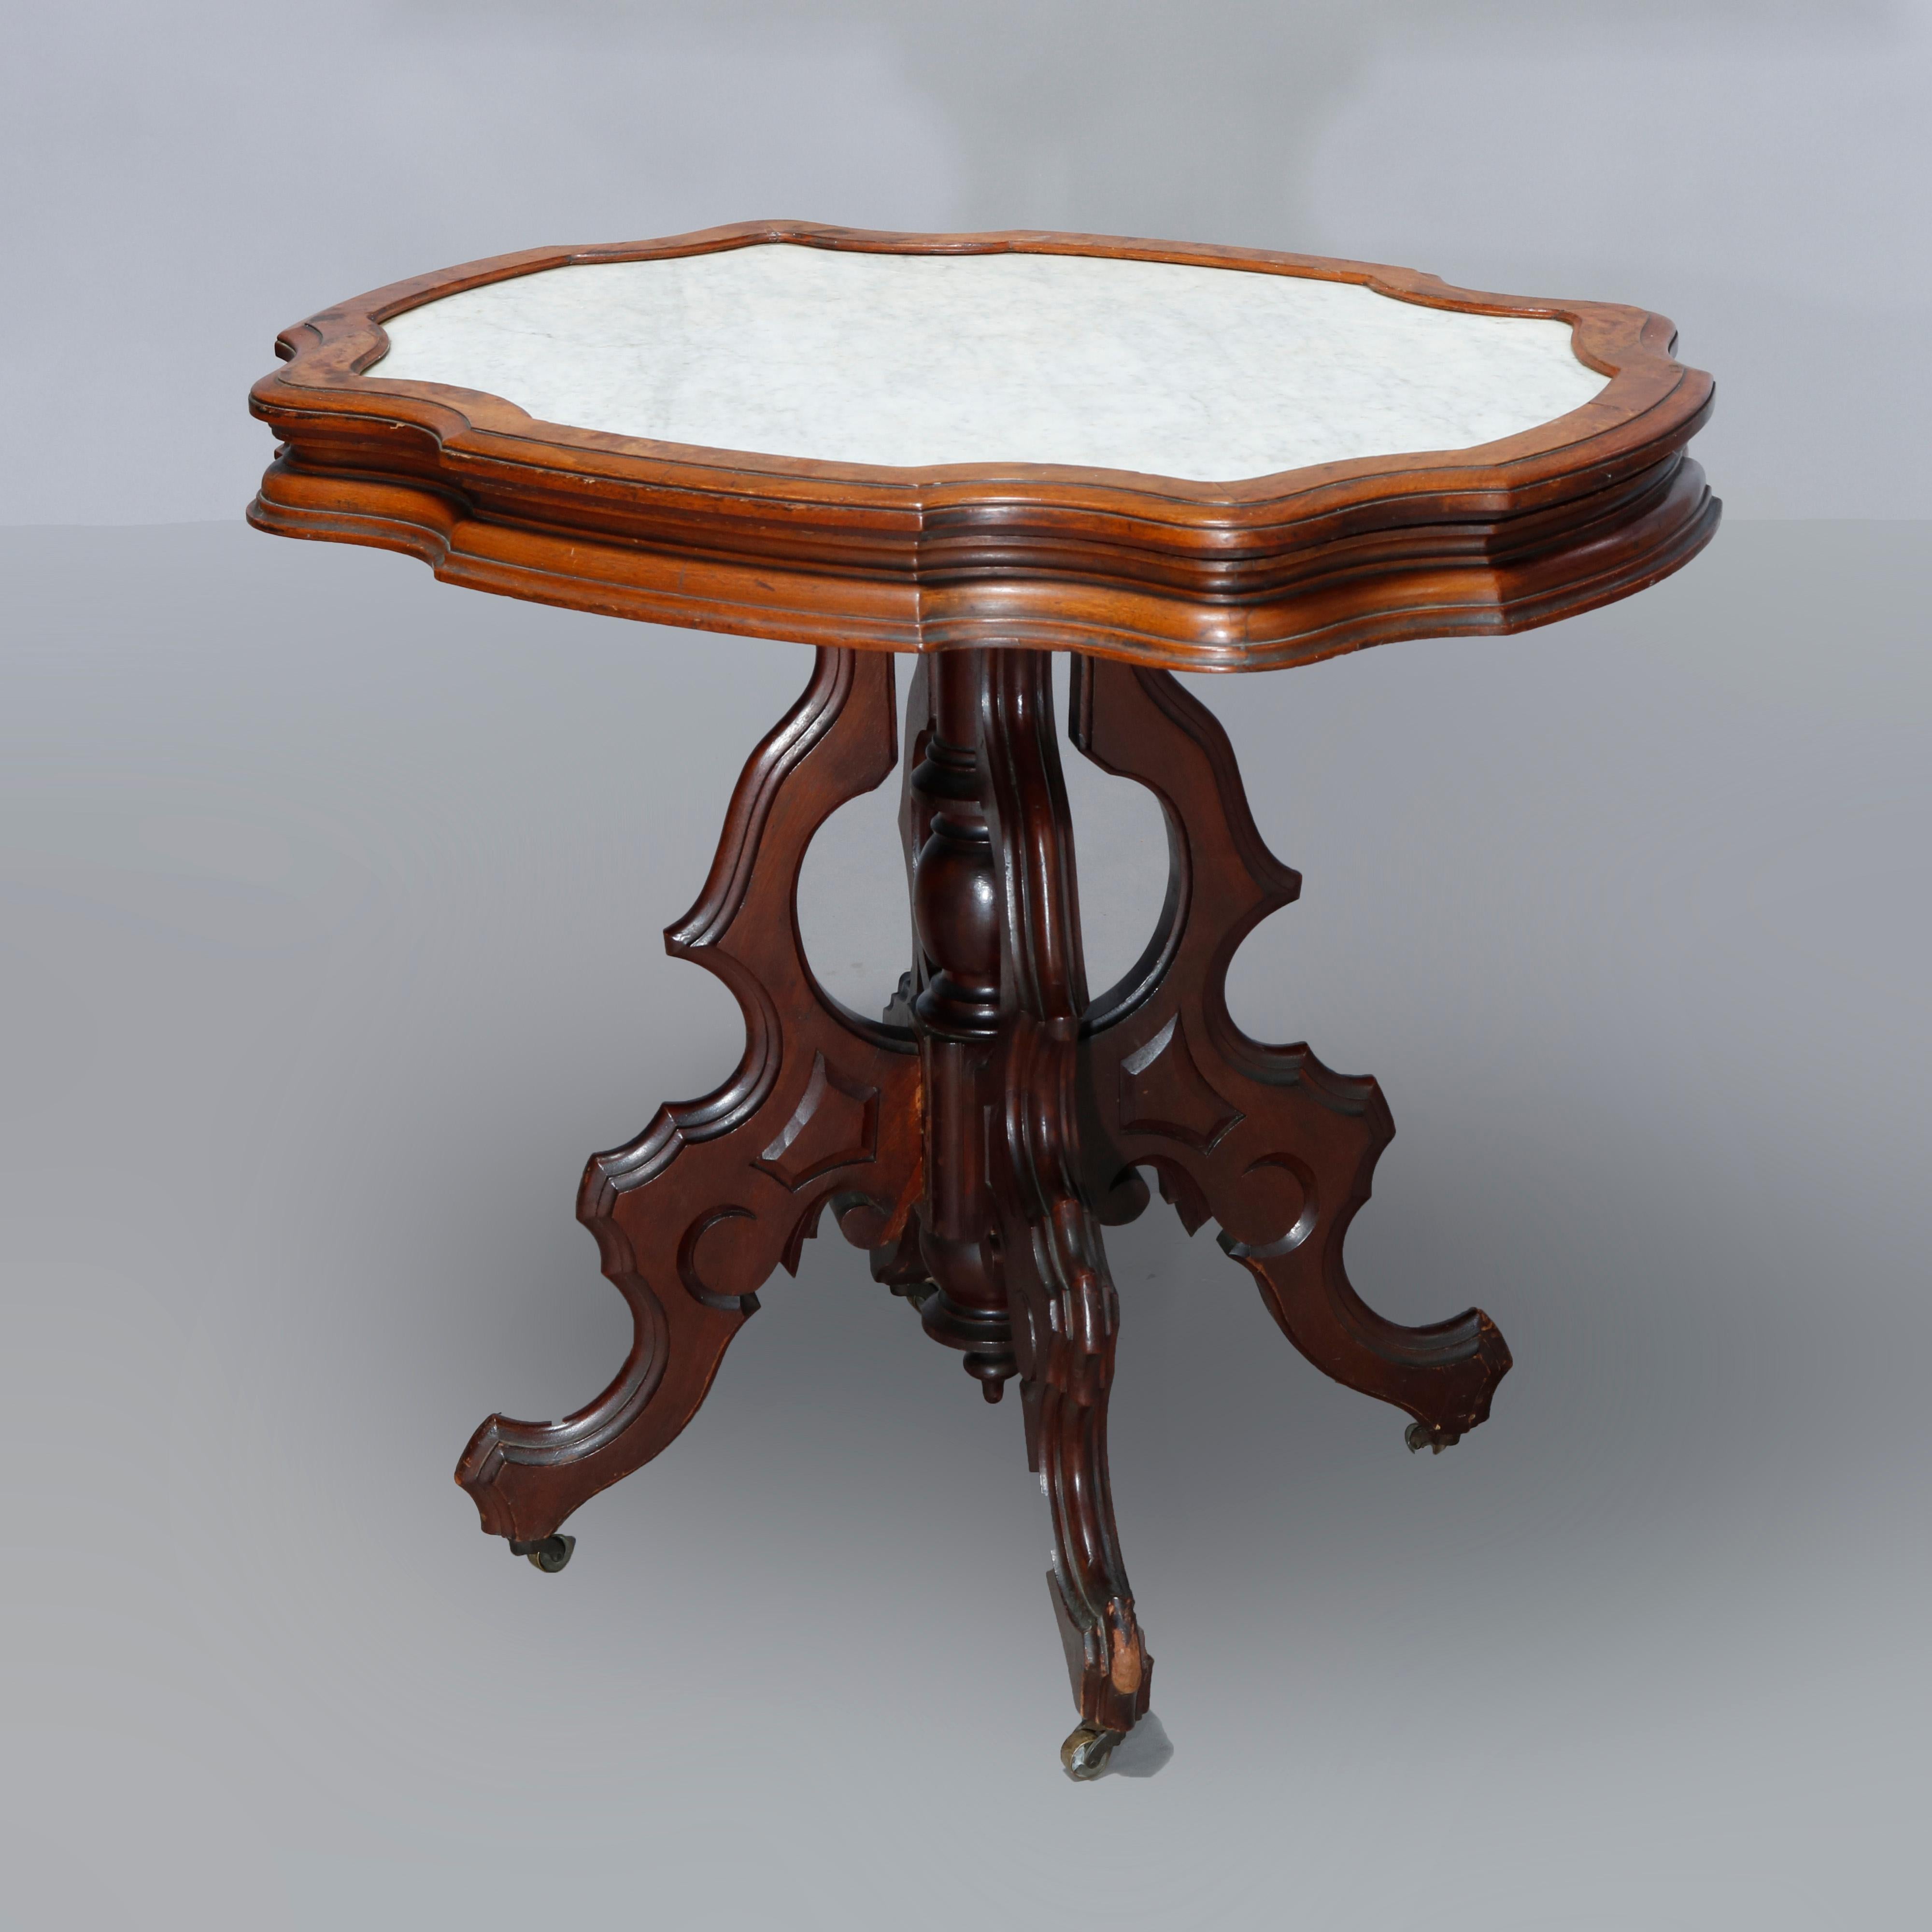 An antique Victorian parlor table offers inset picture frame shaped marble top over carved walnut and burl base having scroll form legs with central turned column and drop finial, c1890.

Measures: 29.5